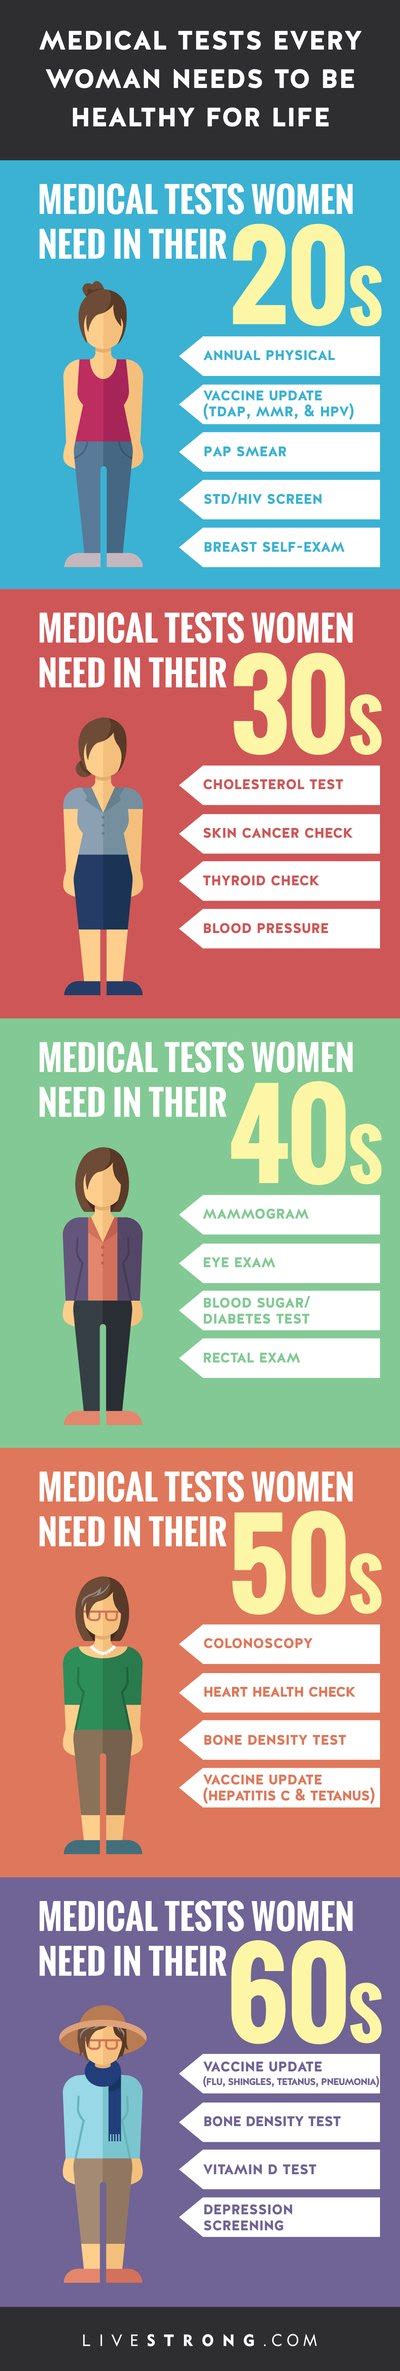 Medical Tests Every Woman Needs To Be Healthy For Life Livestrongcom